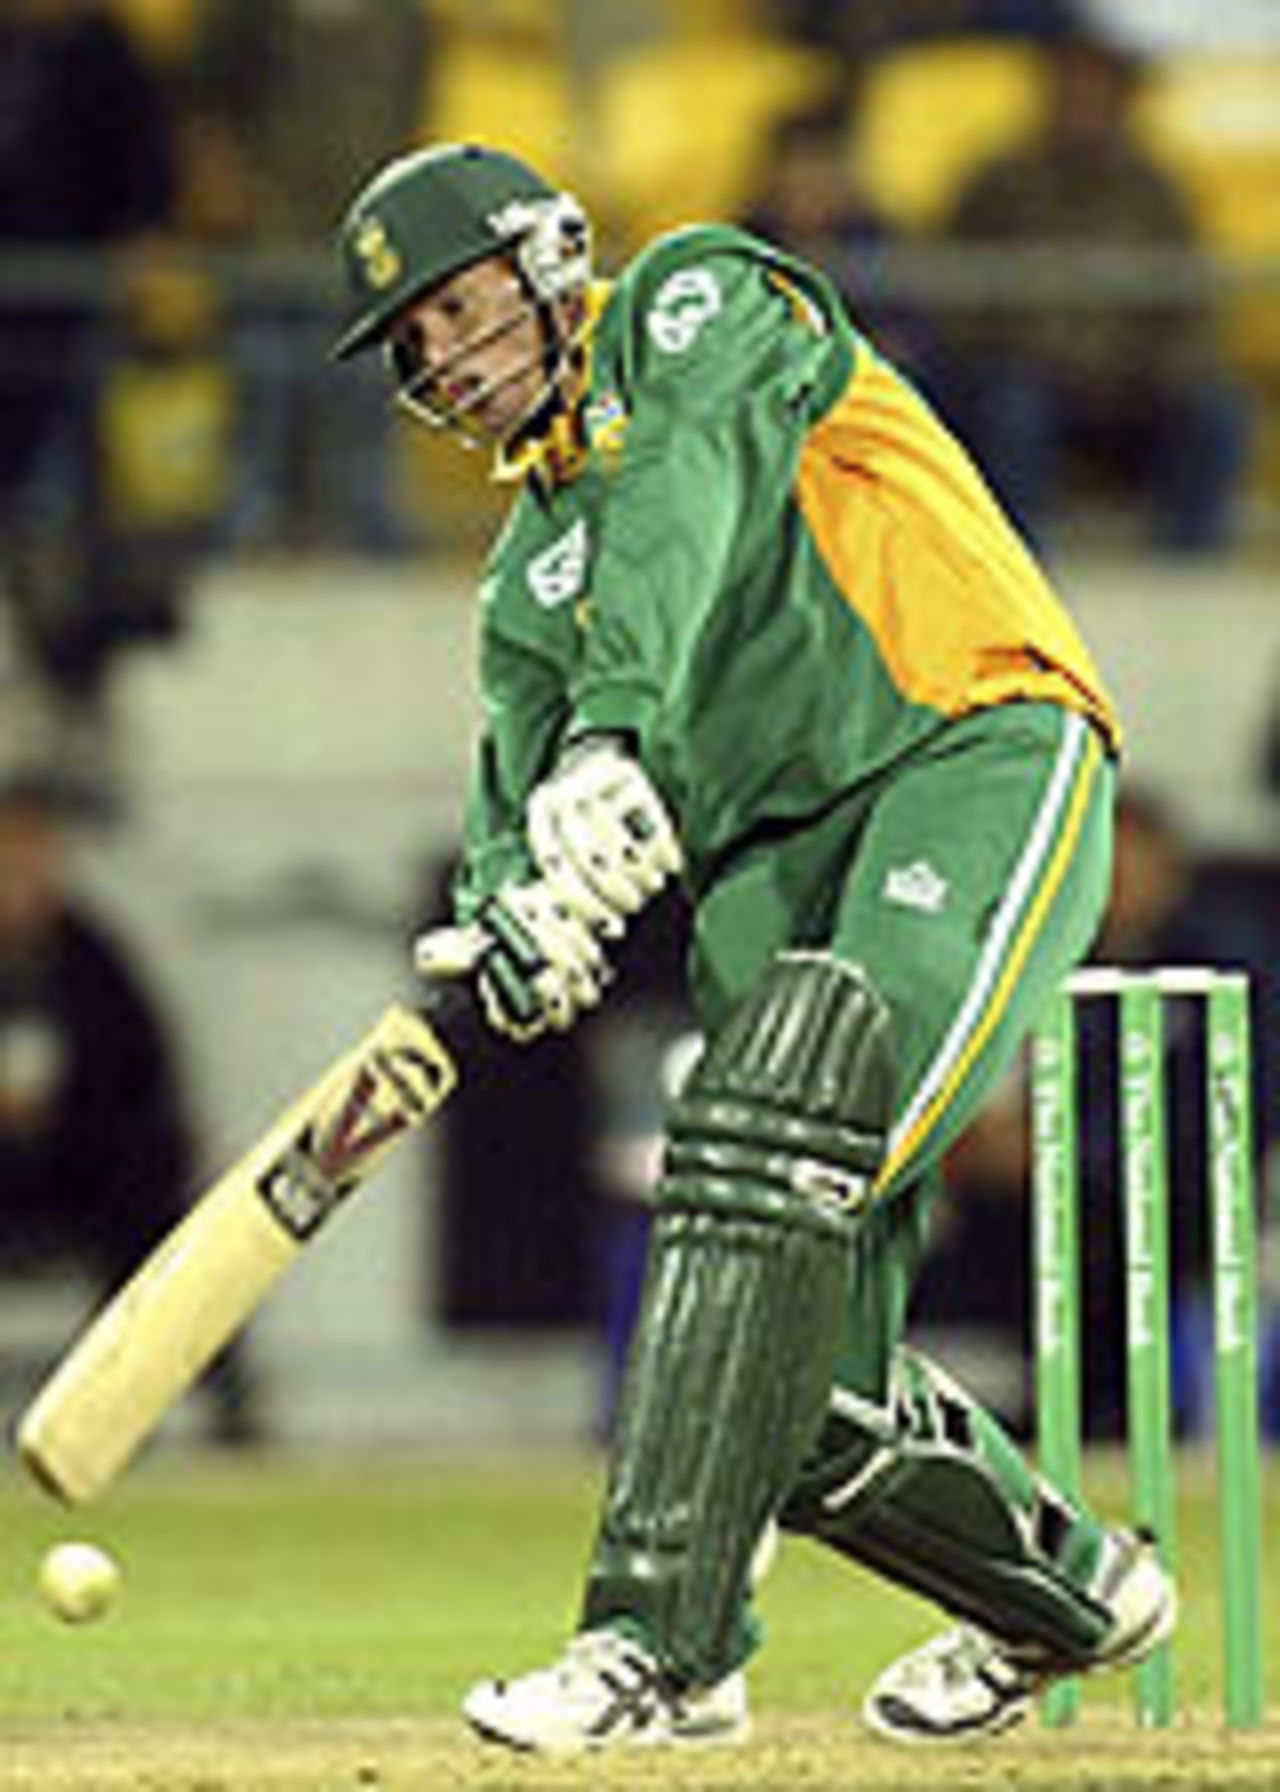 Shaun Pollock hits out in vain, New Zealand v South Africa, 3rd ODI, Wellington, February 20, 2004